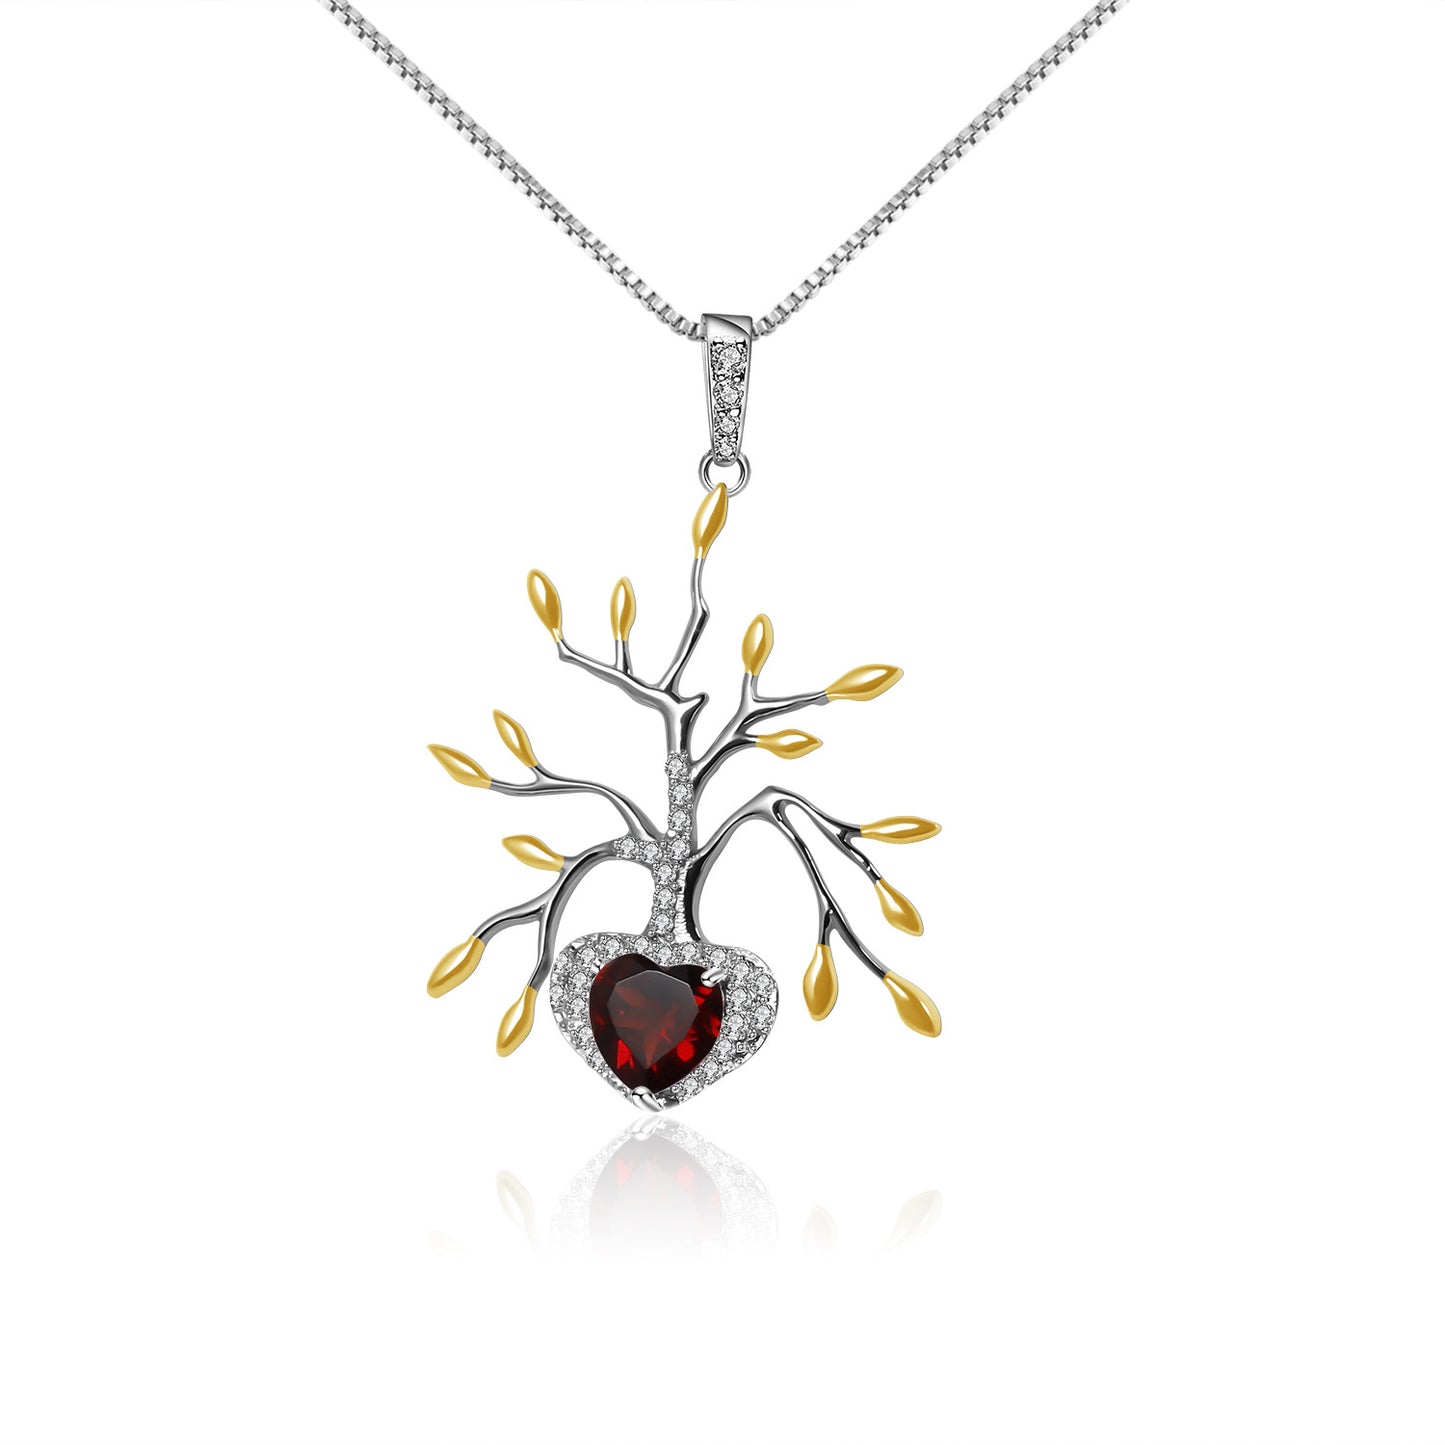 Premium Design Natural Colourful Gemstone Life Tree Pendant Silver Necklace for Women